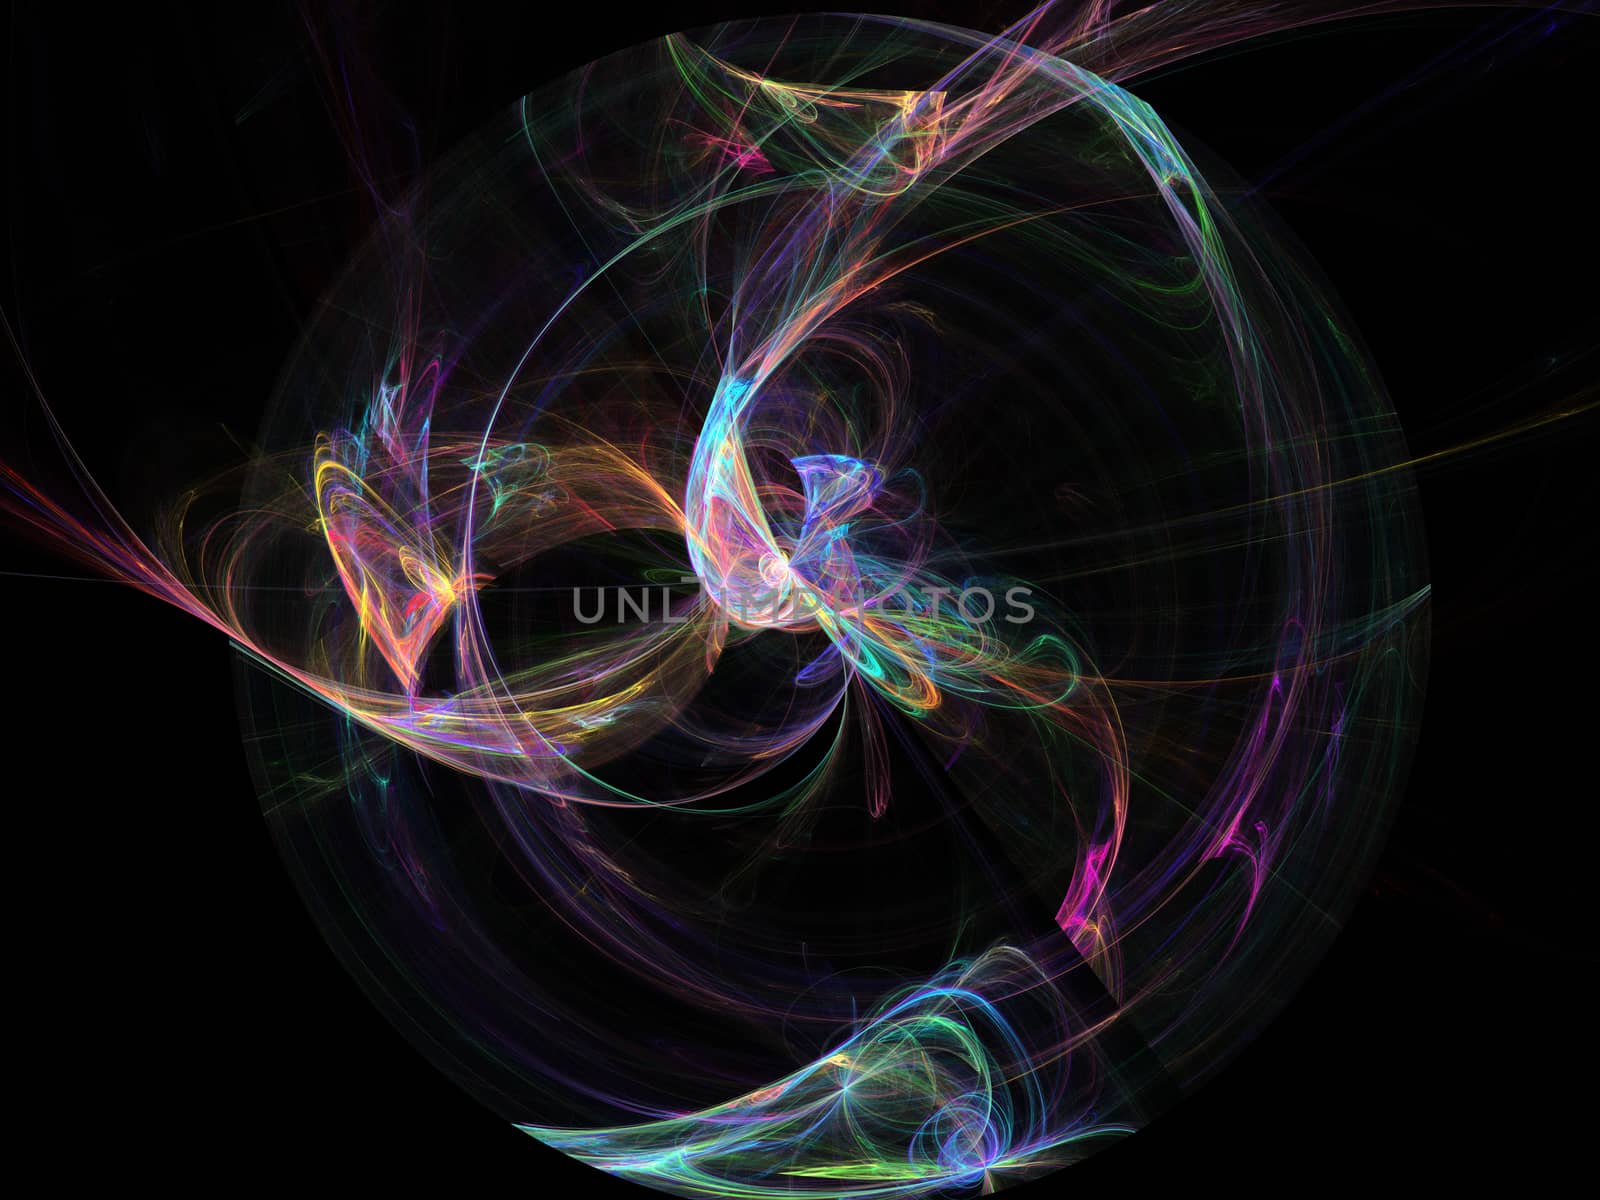 Colorful fractal plasma sphere, strings of chaotic plasma energy. 
smoke, energy ball discharge, scientific plasma study. digital flames, 
artistic design, science fiction, Abstract illustration. 
This image was created using fractal generating and graphic manipulation software.